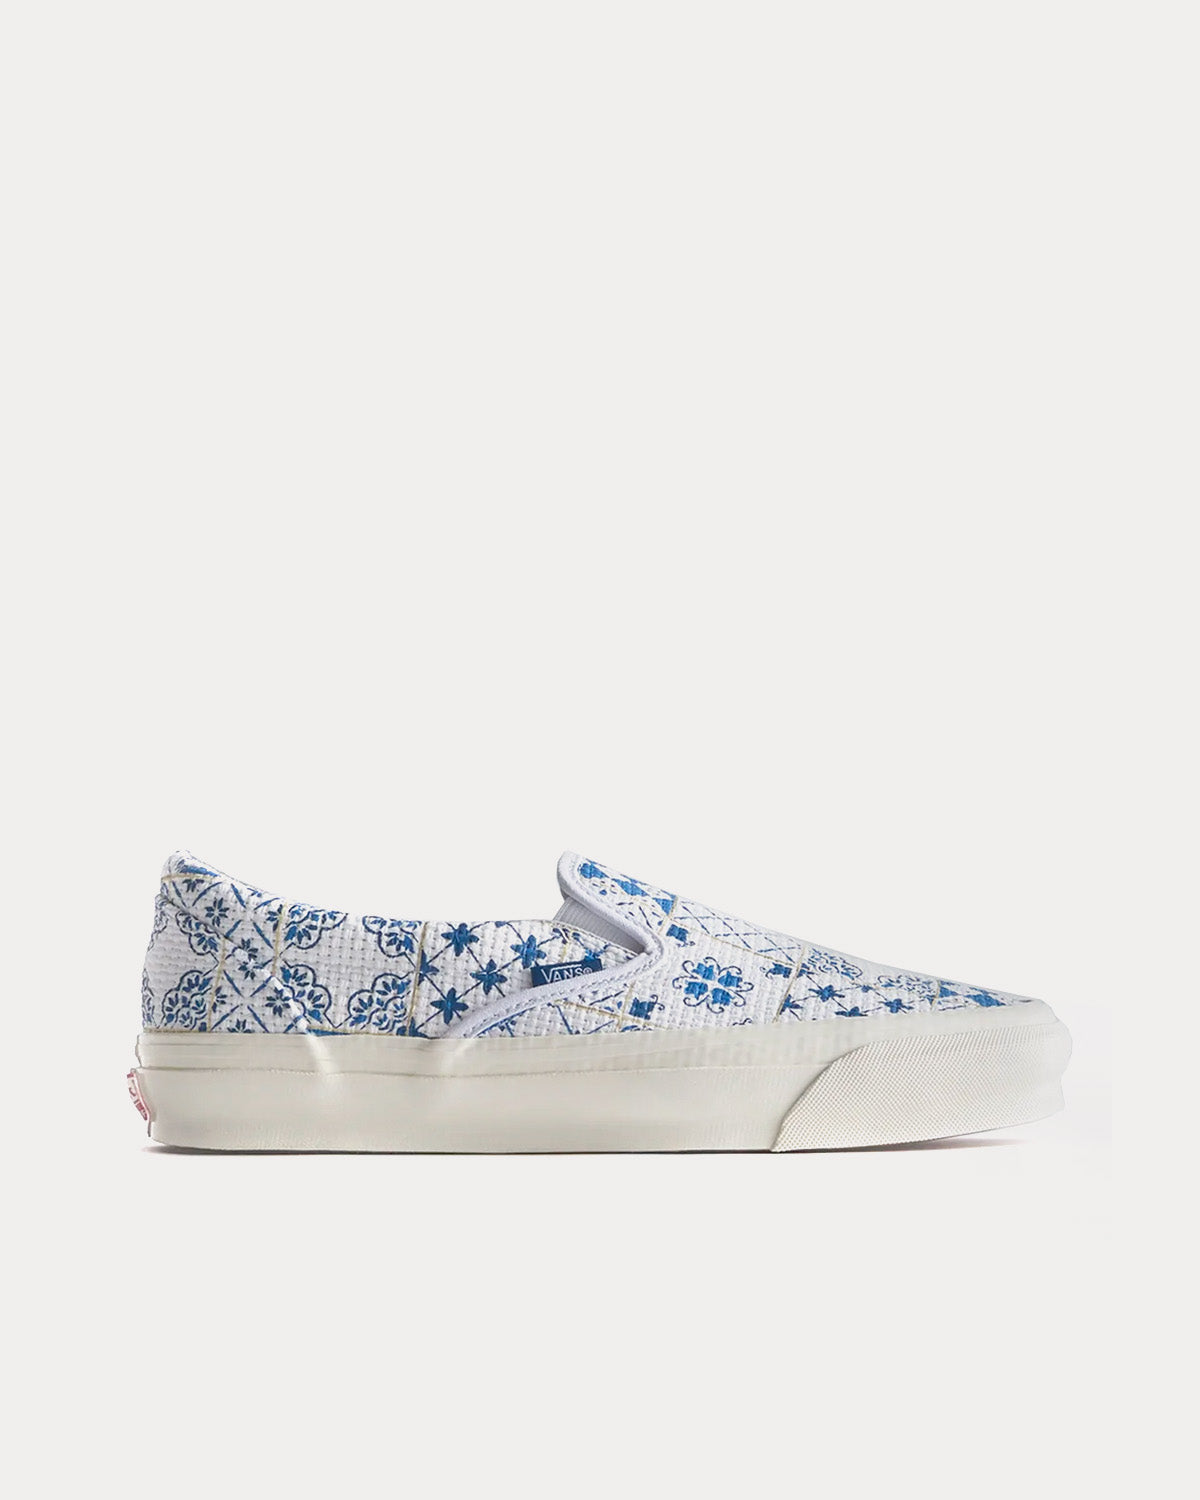 Vans x Kith Azulejo Tile OG Authentic LX White Low Top Sneakers 